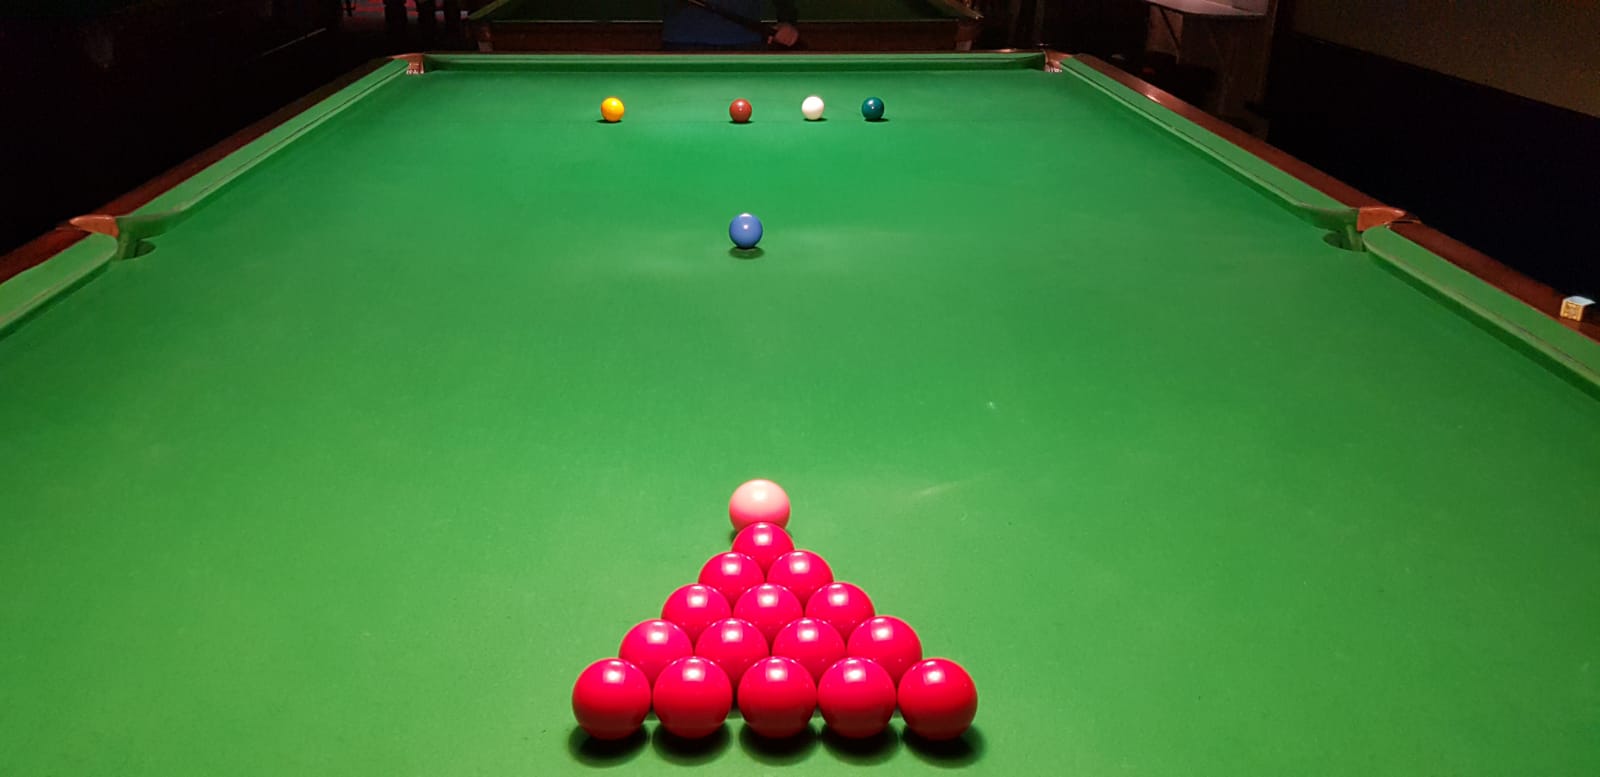 Snooker table covers: 3 superb covers for full size tables